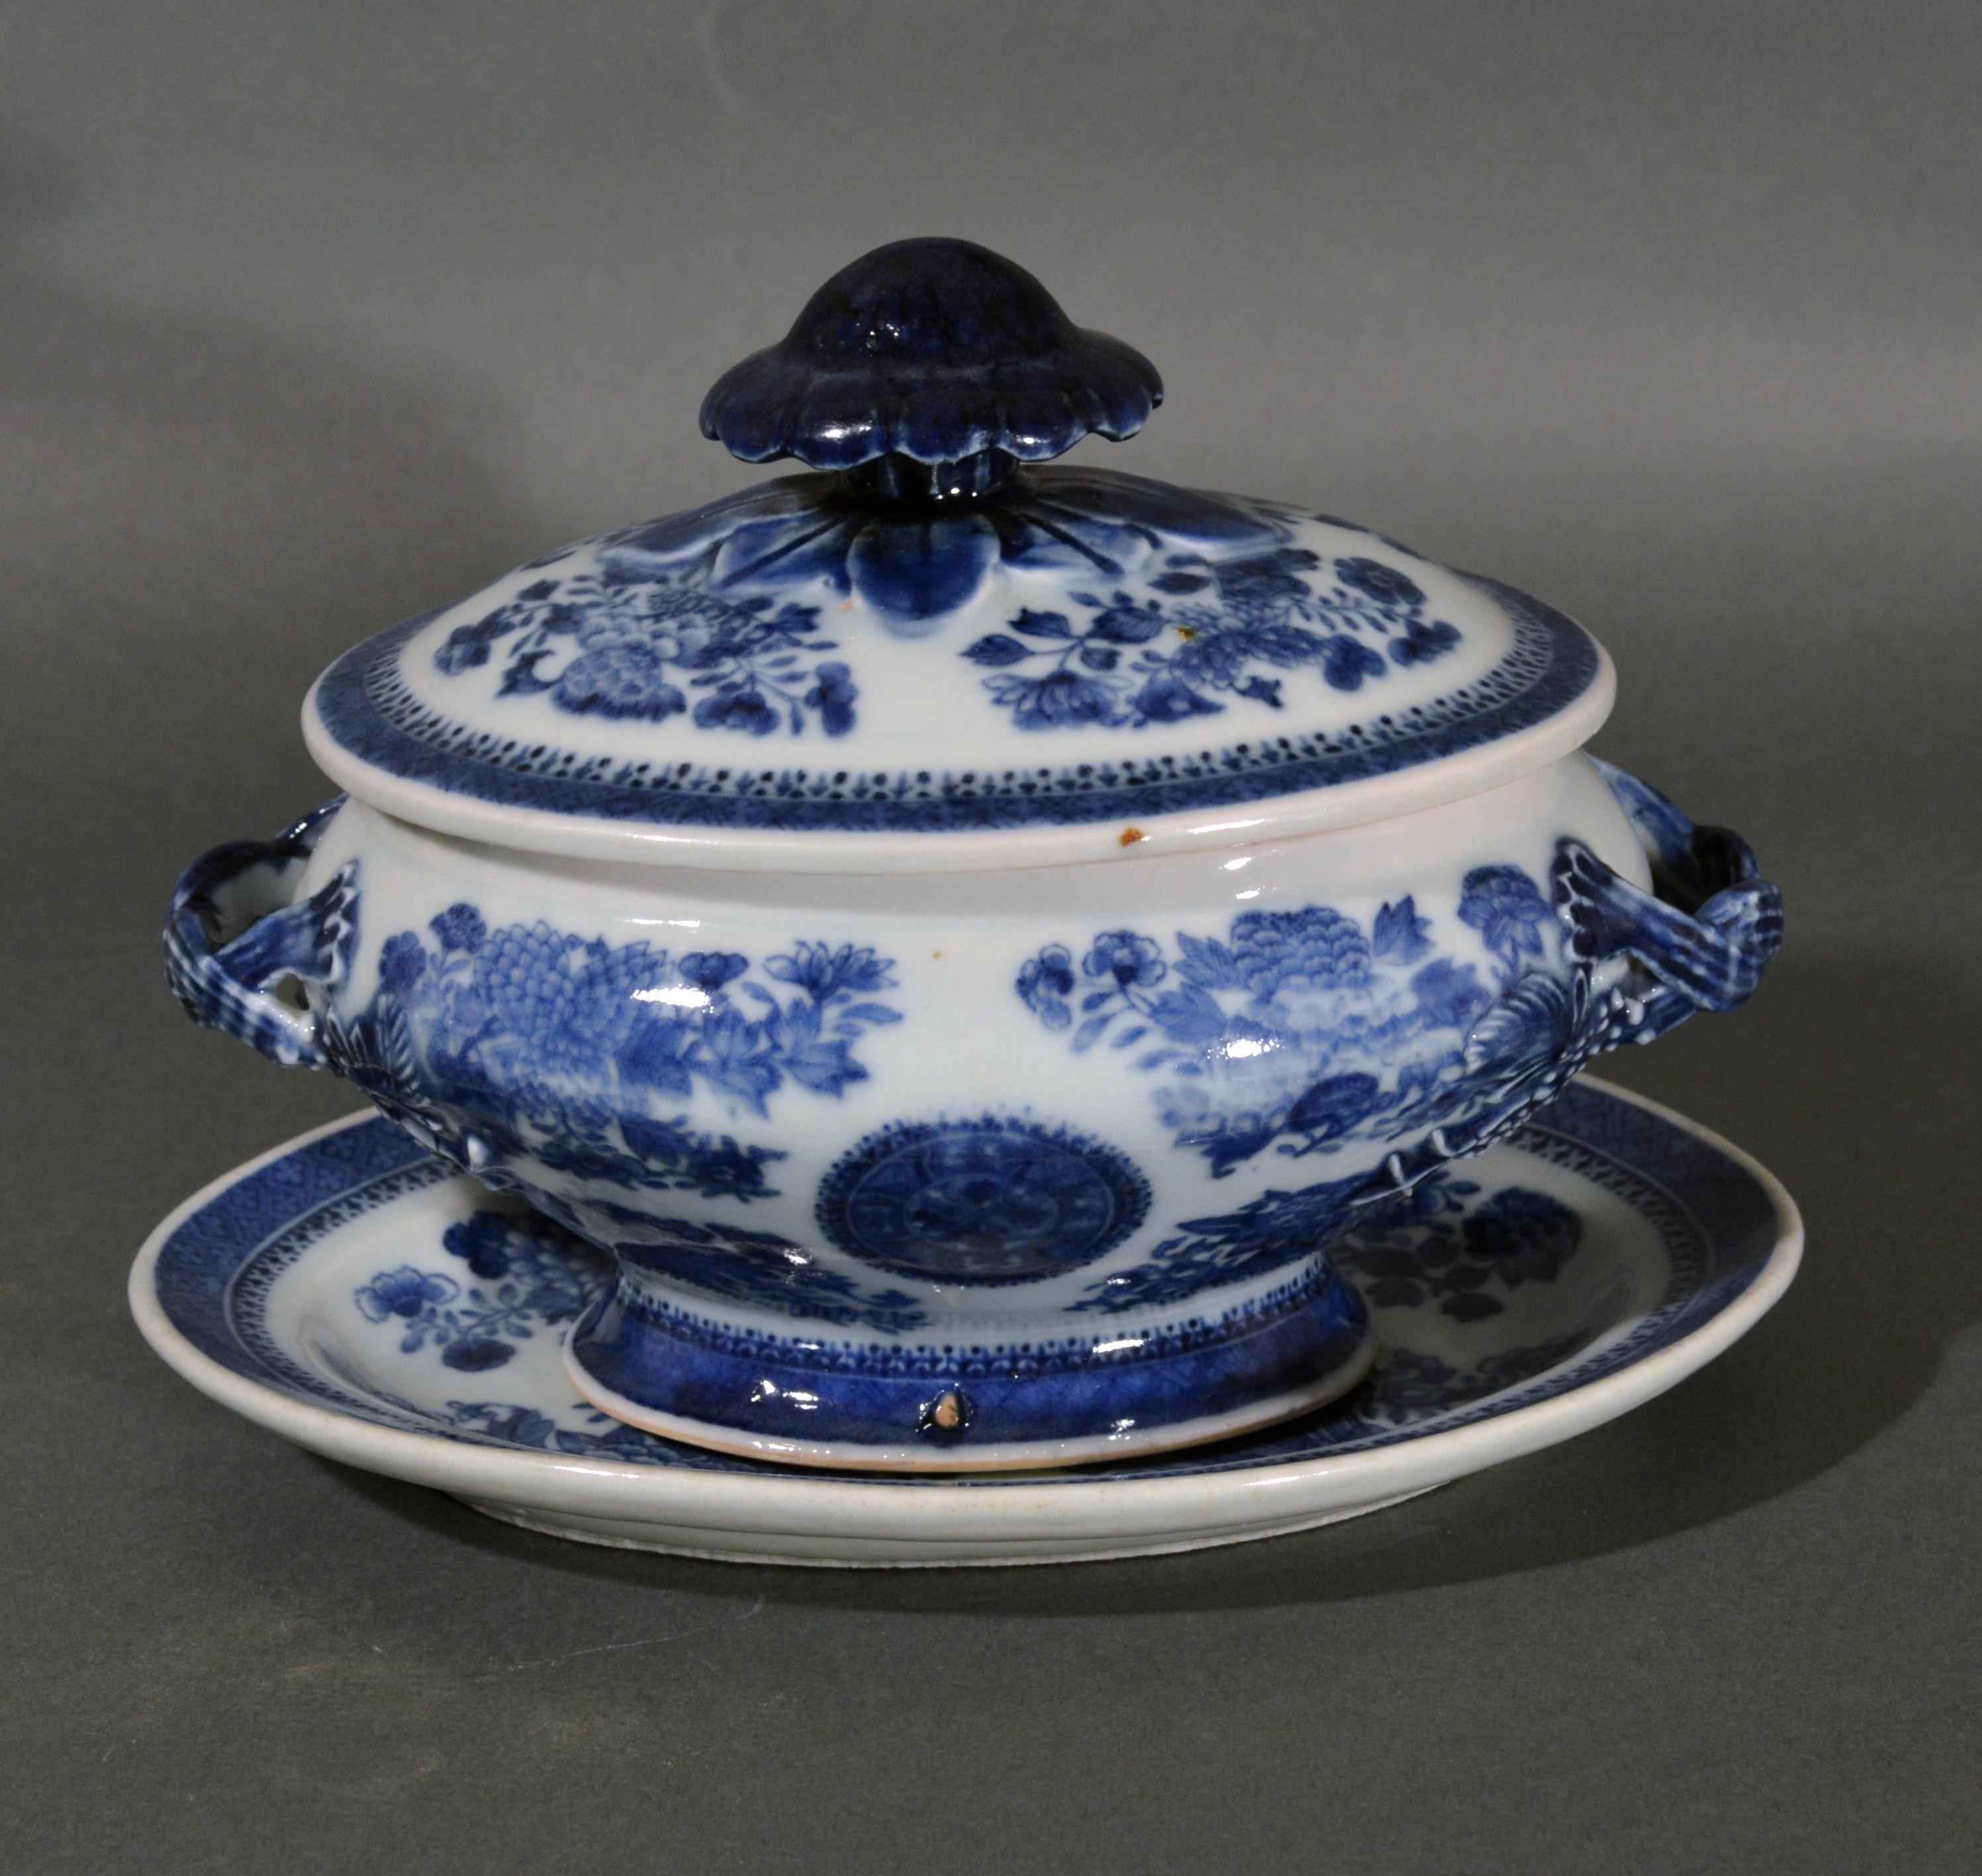 Chinese Export Porcelain Blue Fitzhugh Sauce Tureens, Covers & Stands In Good Condition For Sale In Downingtown, PA